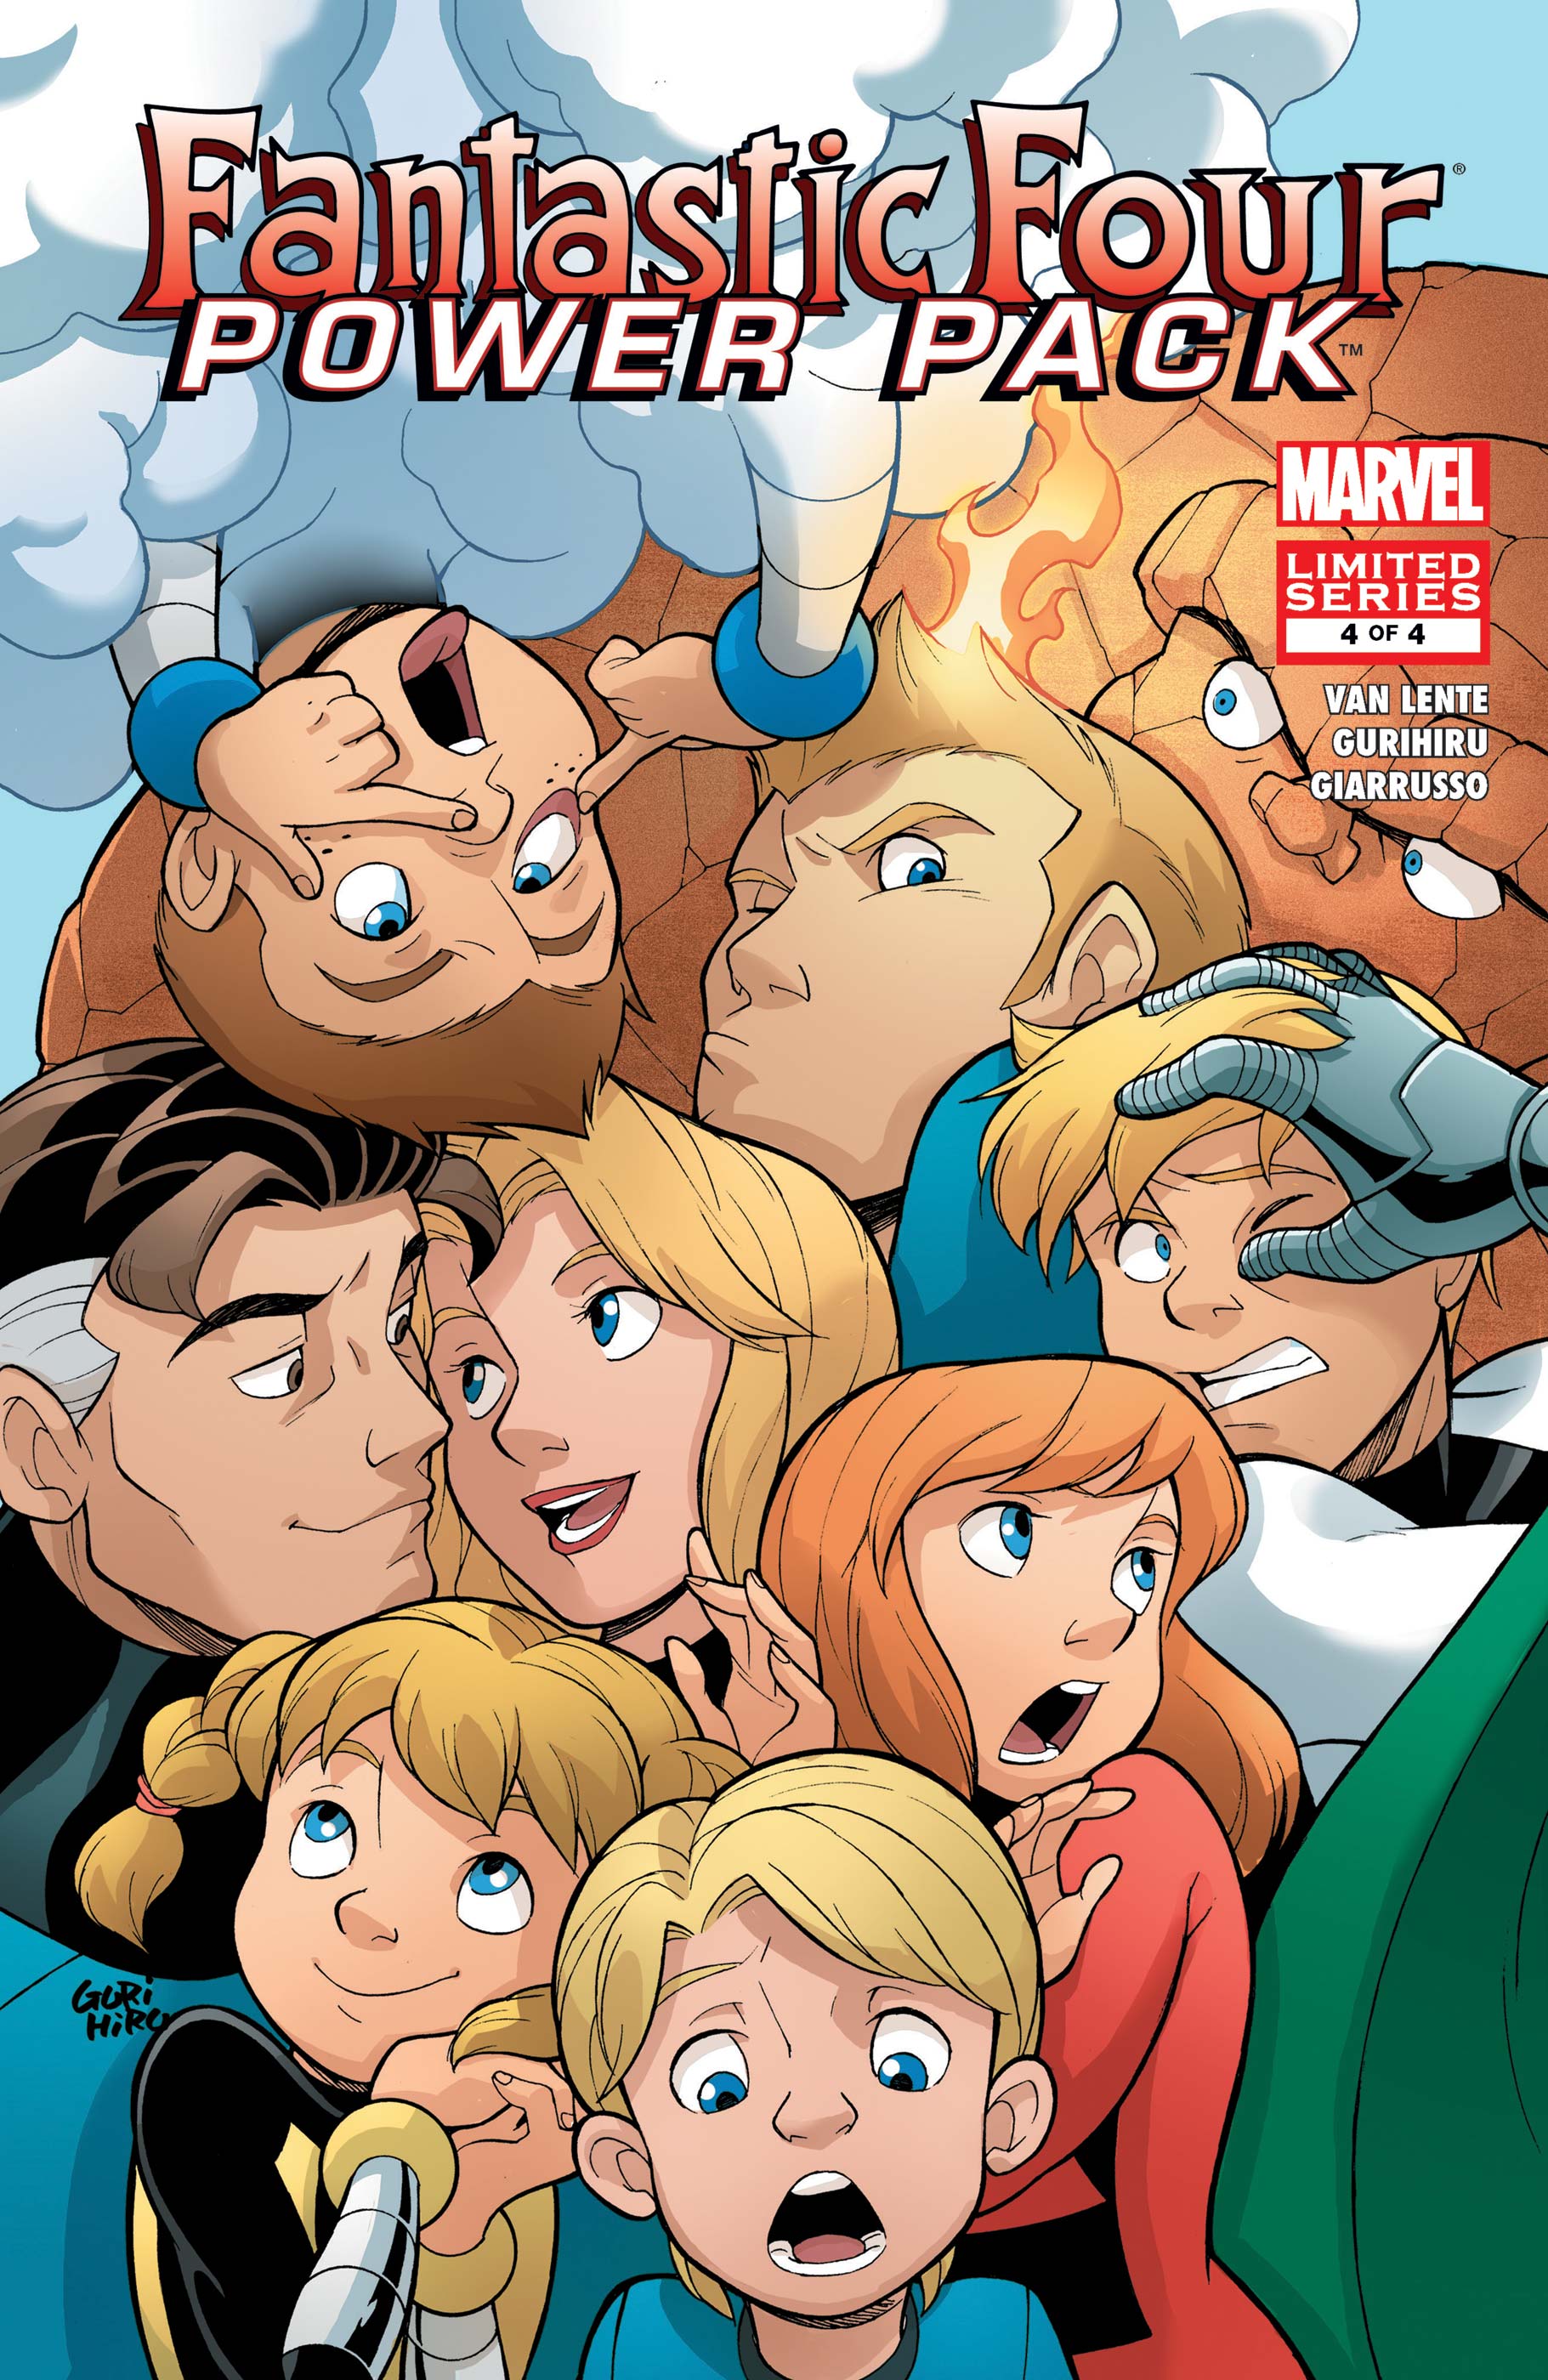 Fantastic Four and Power Pack (2007) #4